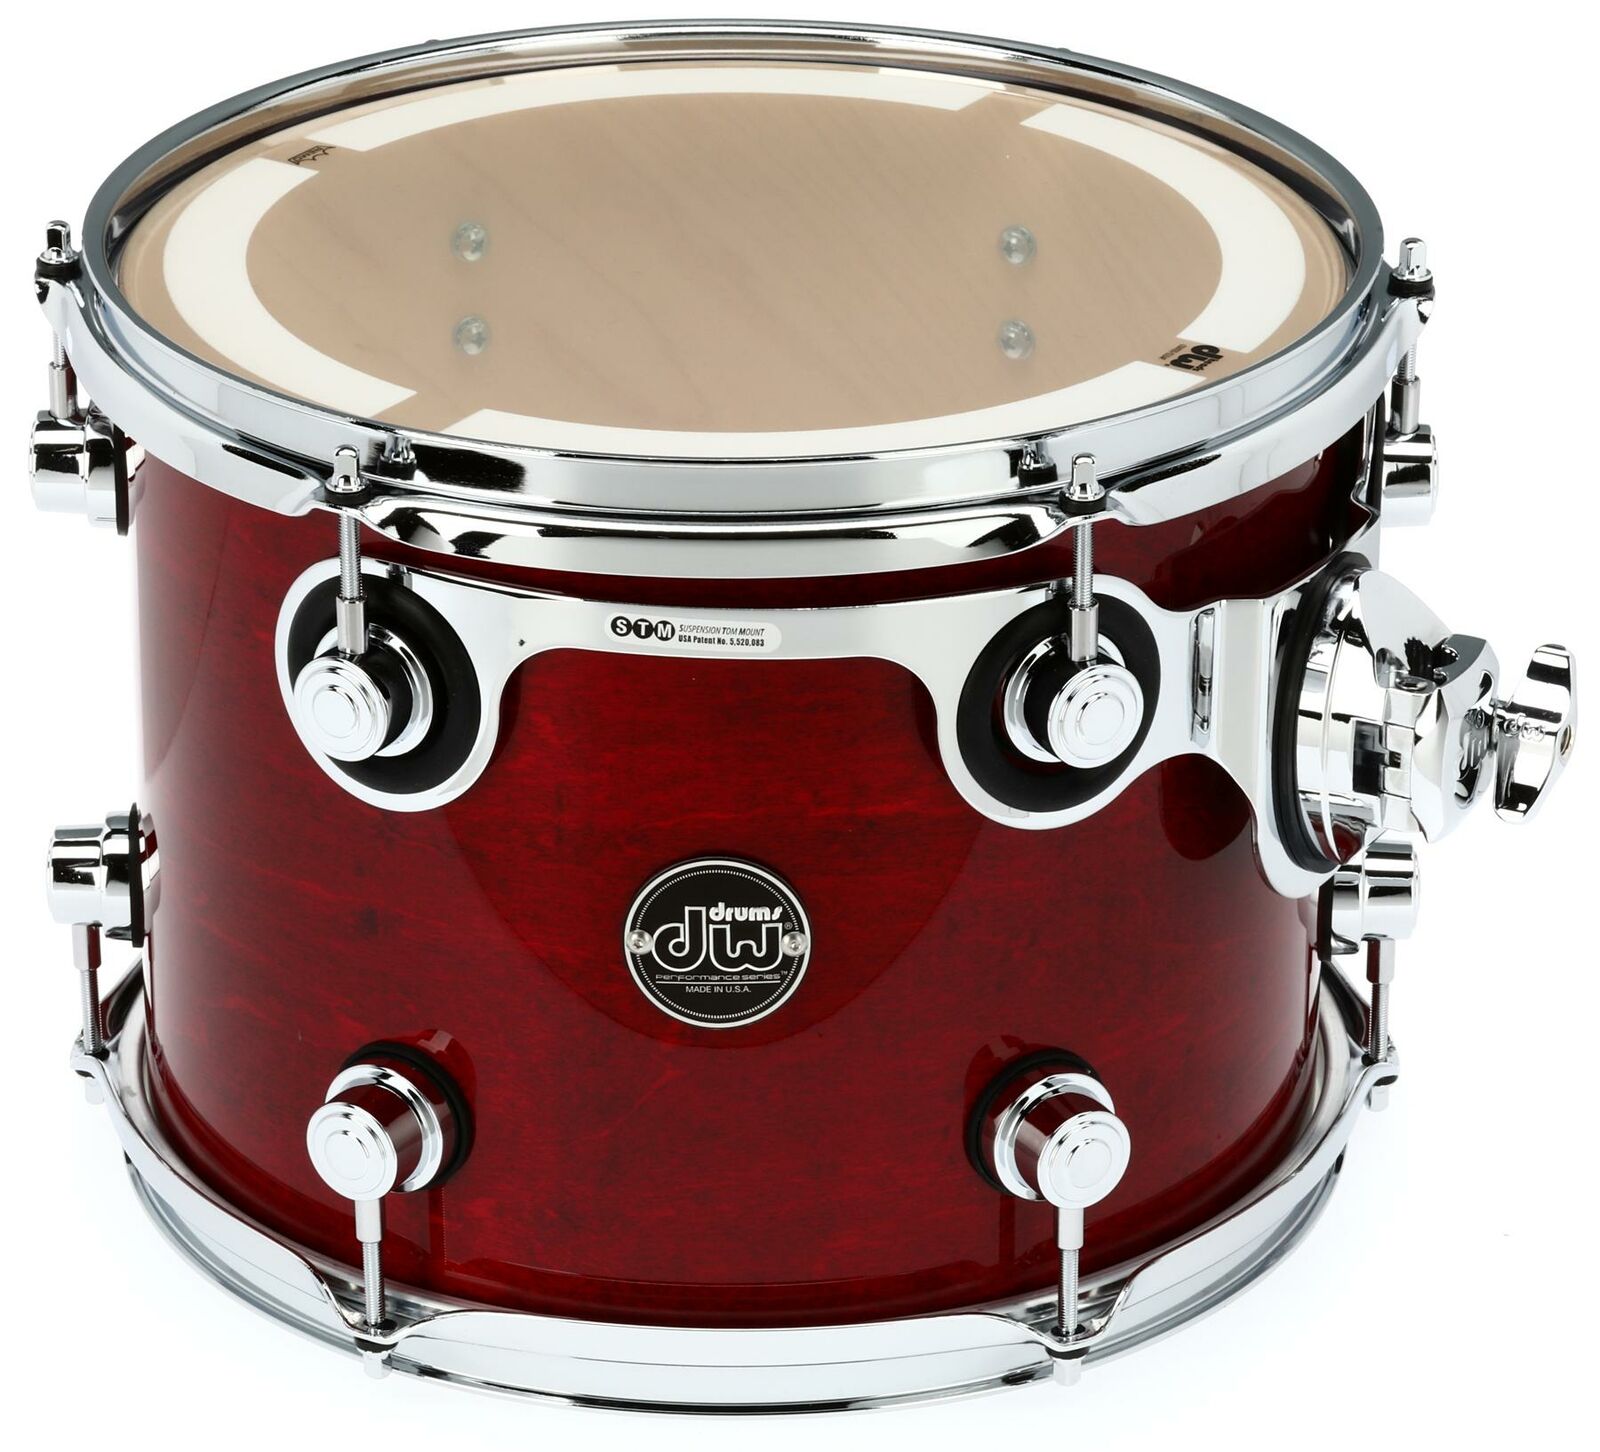 DW Performance Series Mounted Tom - 9 x 12 inch - Cherry Stain Lacquer